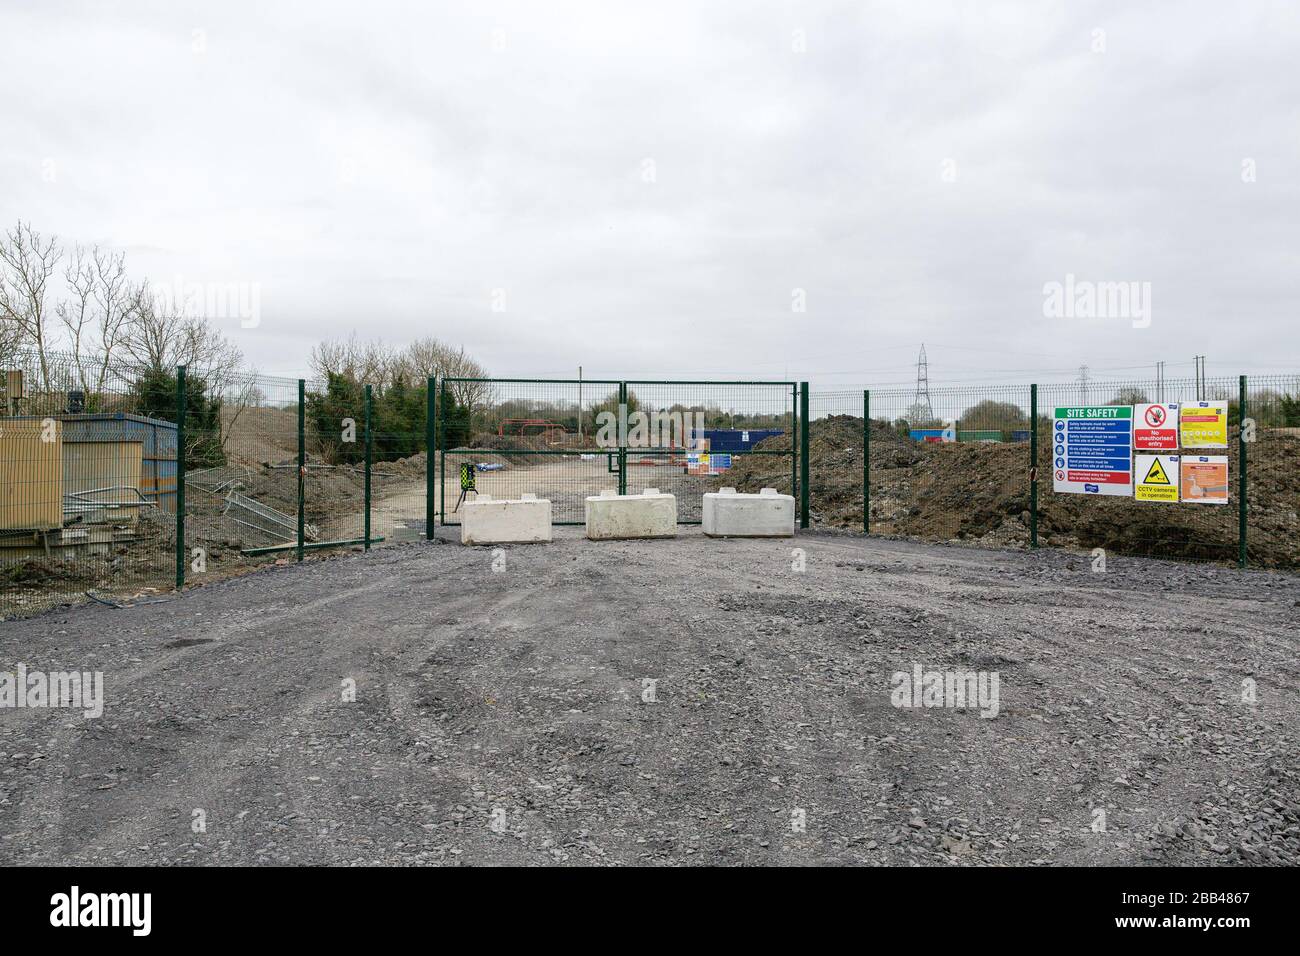 Celbridge, Kildare, Ireland. 30th May, 2020. Covid-19 - Coronovirius Pandemic lockdown in Ireland - deserted streets of Celbridge, empty constructions sites and people practicing social distancing restrictions while shopping and exercising. Credit: Michael Grubka/Alamy Live News Stock Photo